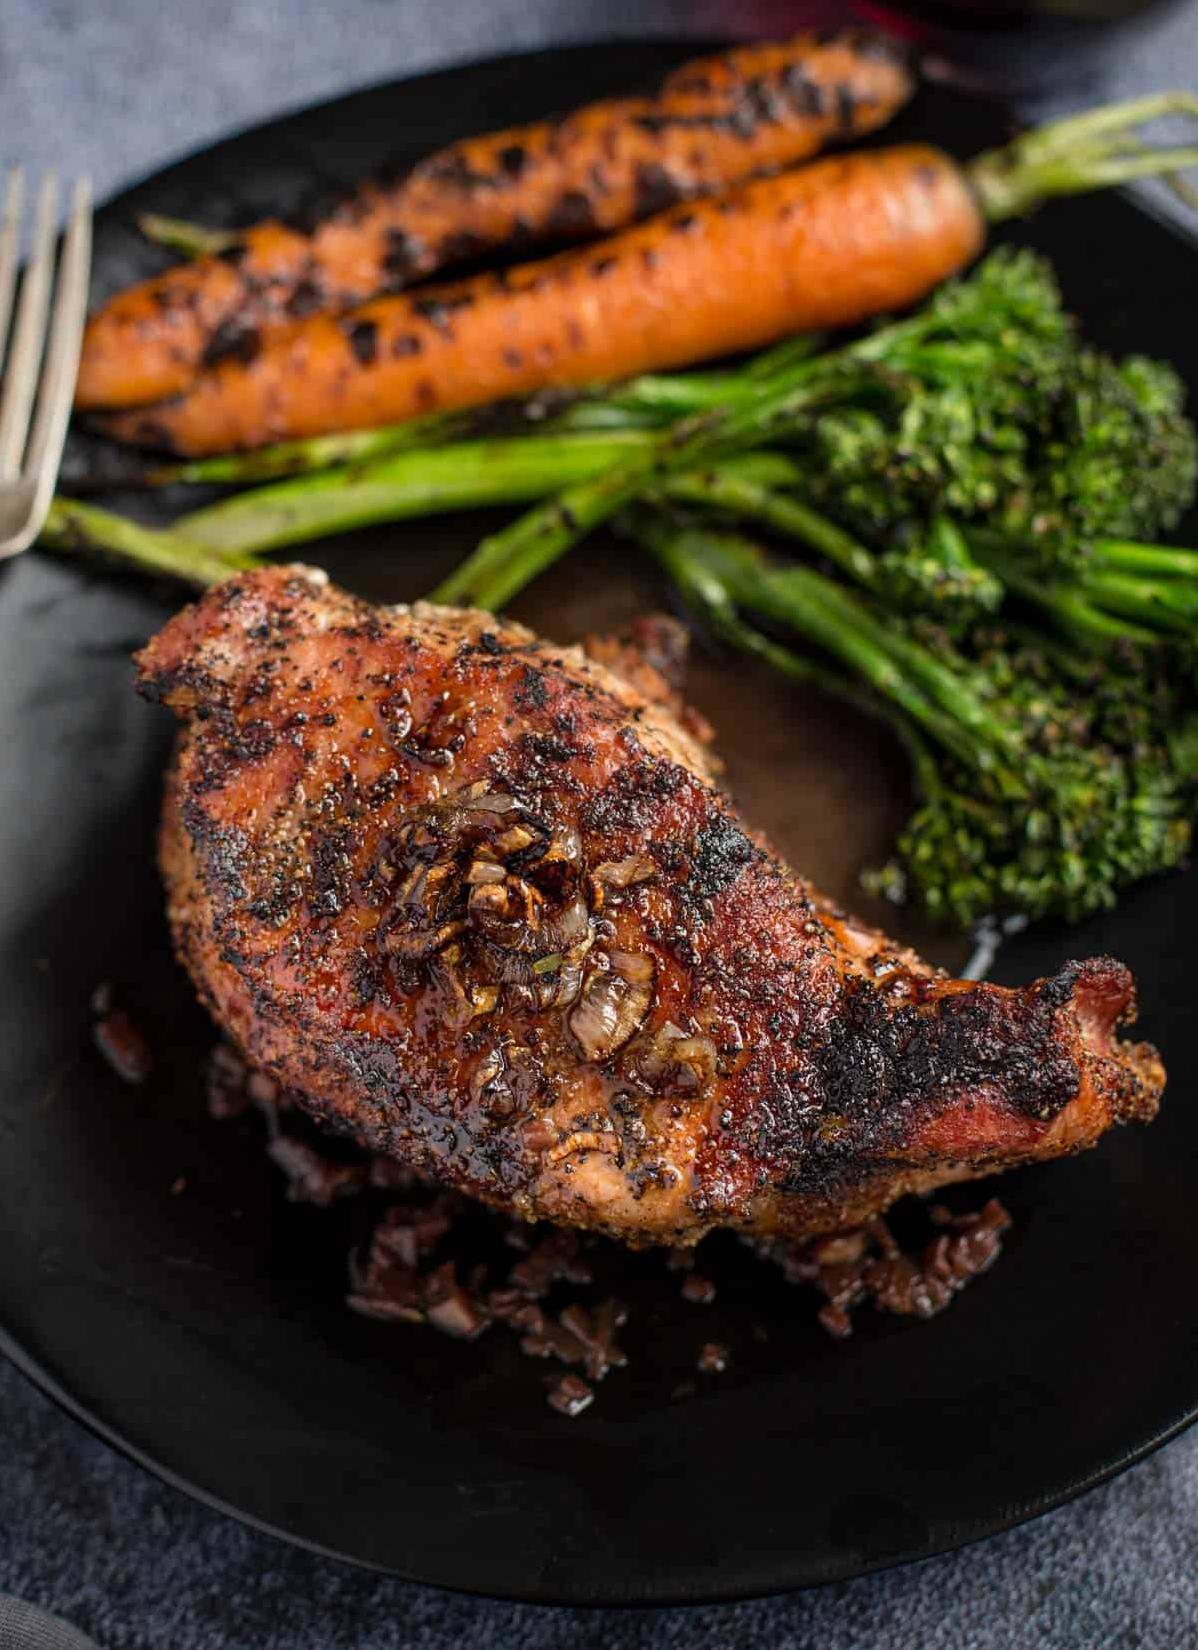  Perfectly seared pork chops drizzled with a tantalizing wine reduction